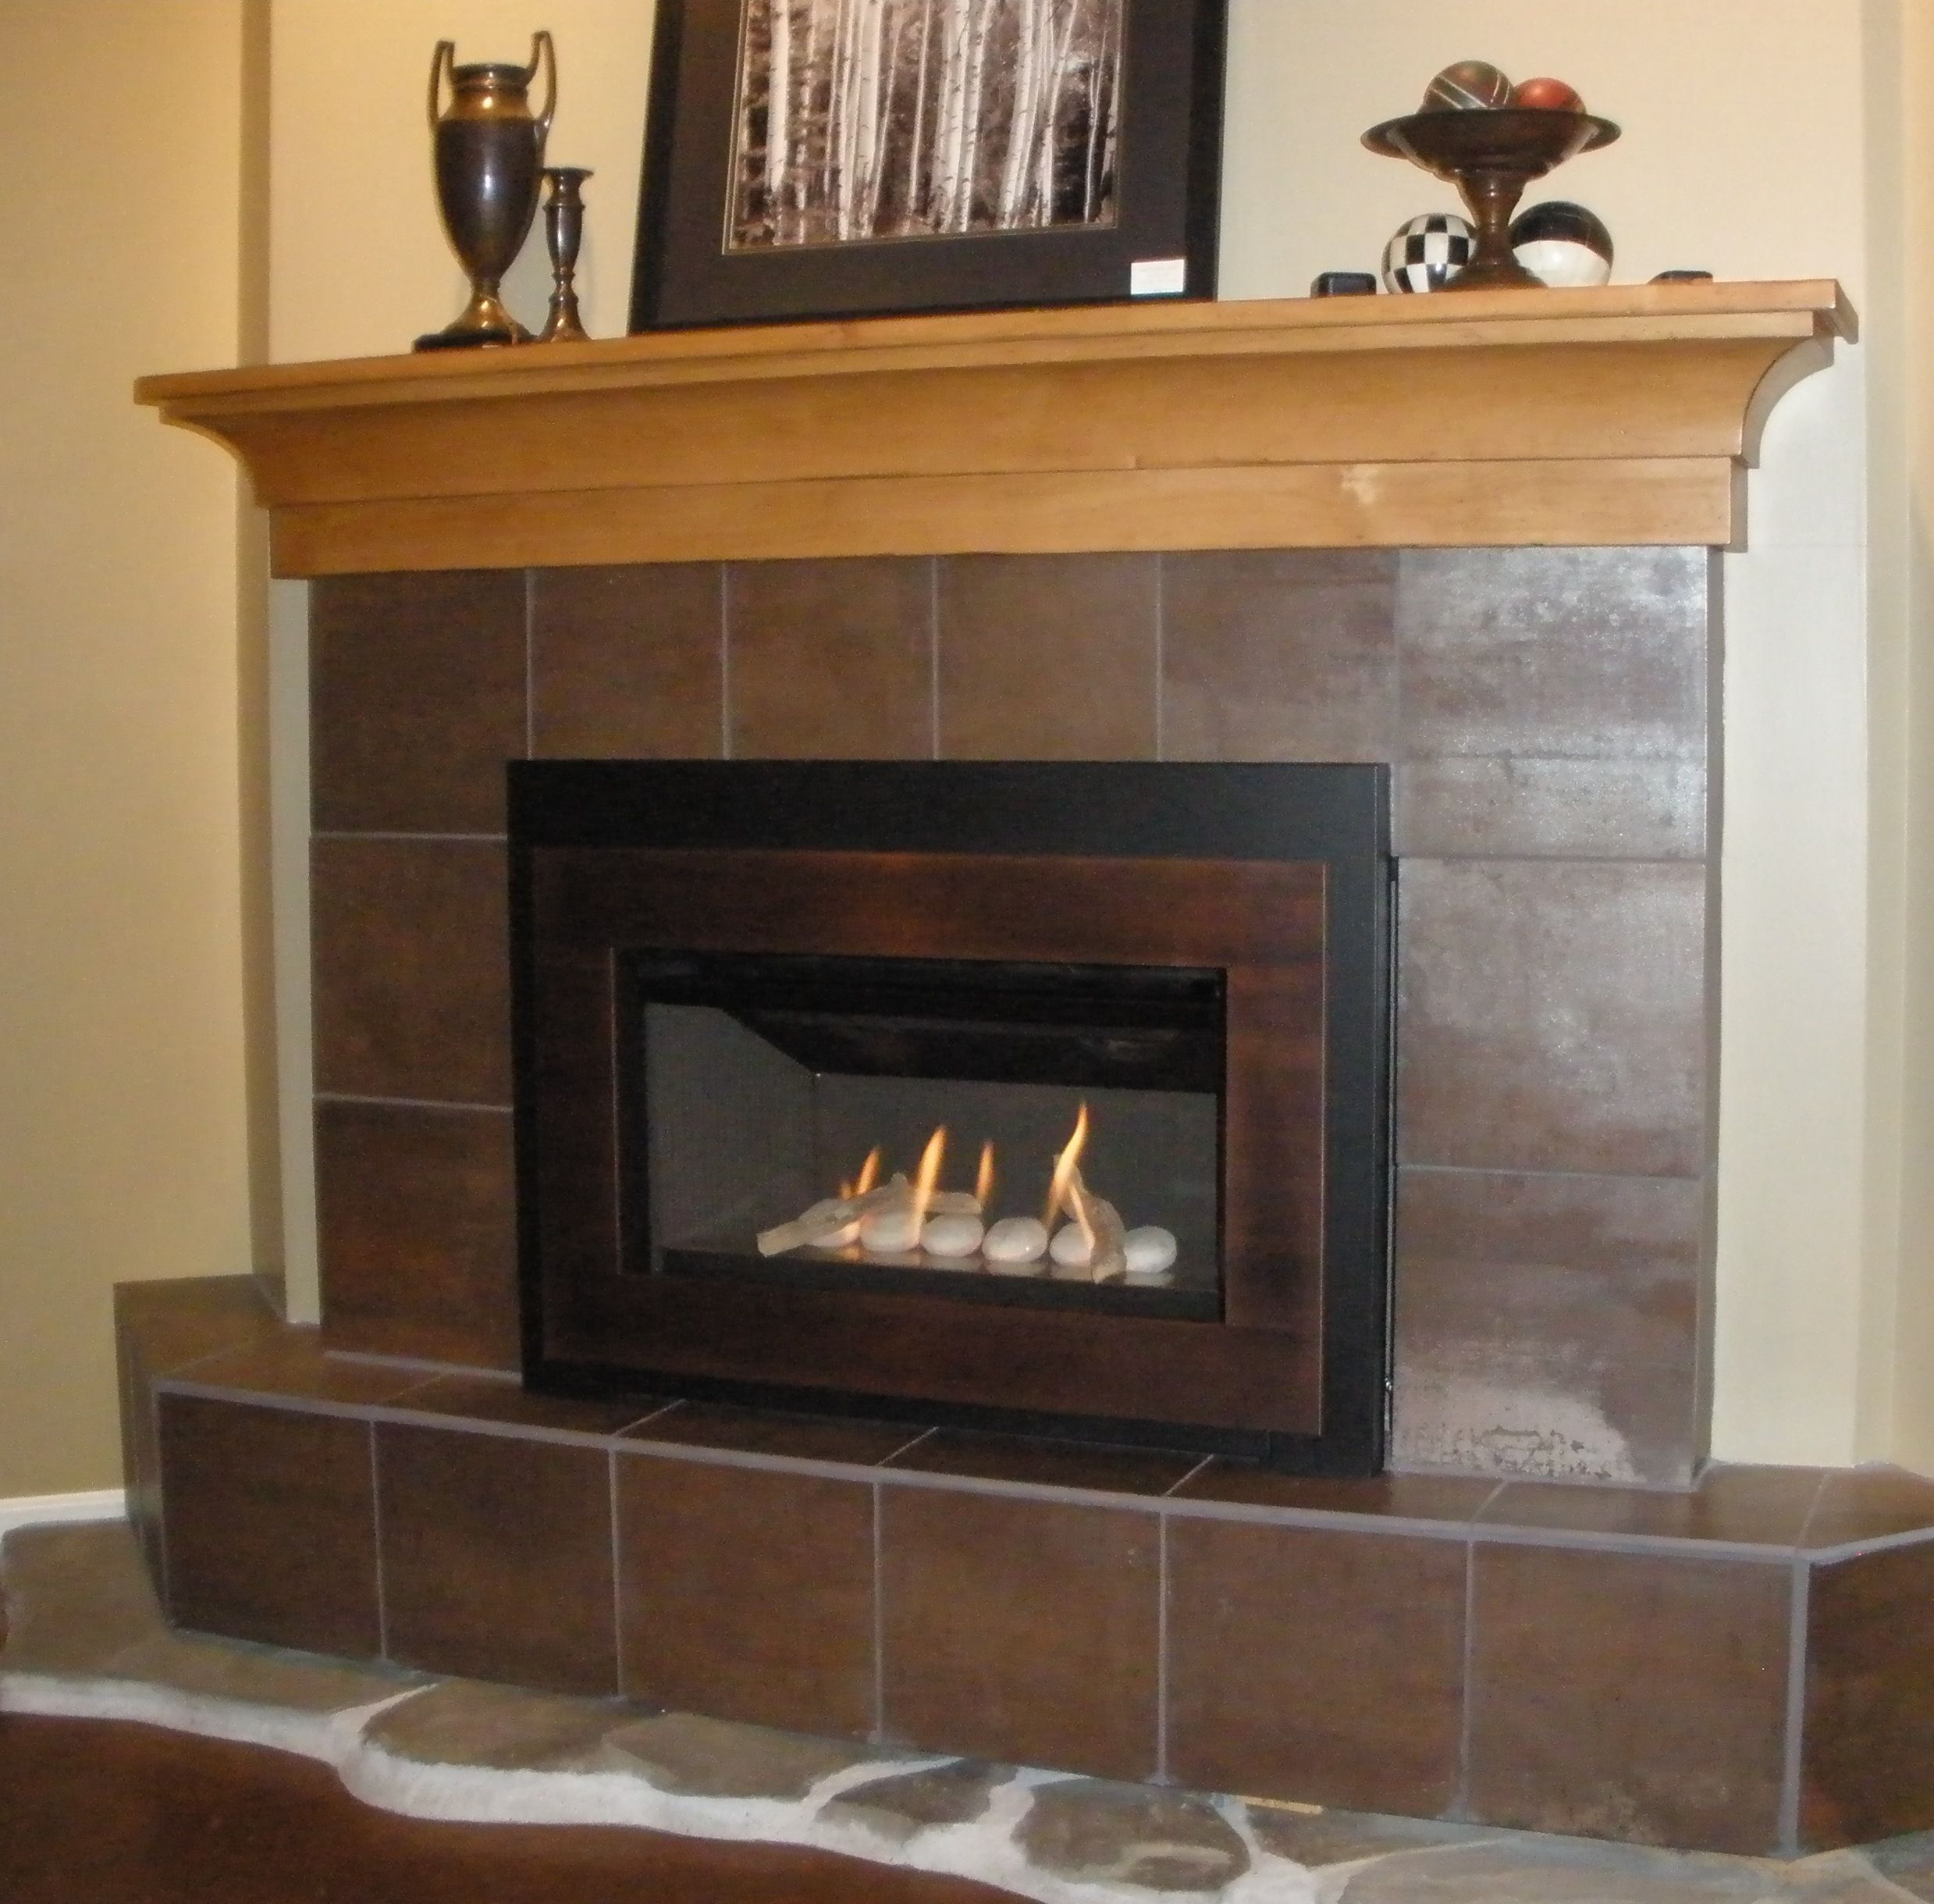 Natural Gas Fireplace Heater Elegant Pin On Valor Radiant Gas Fireplaces Midwest Dealer